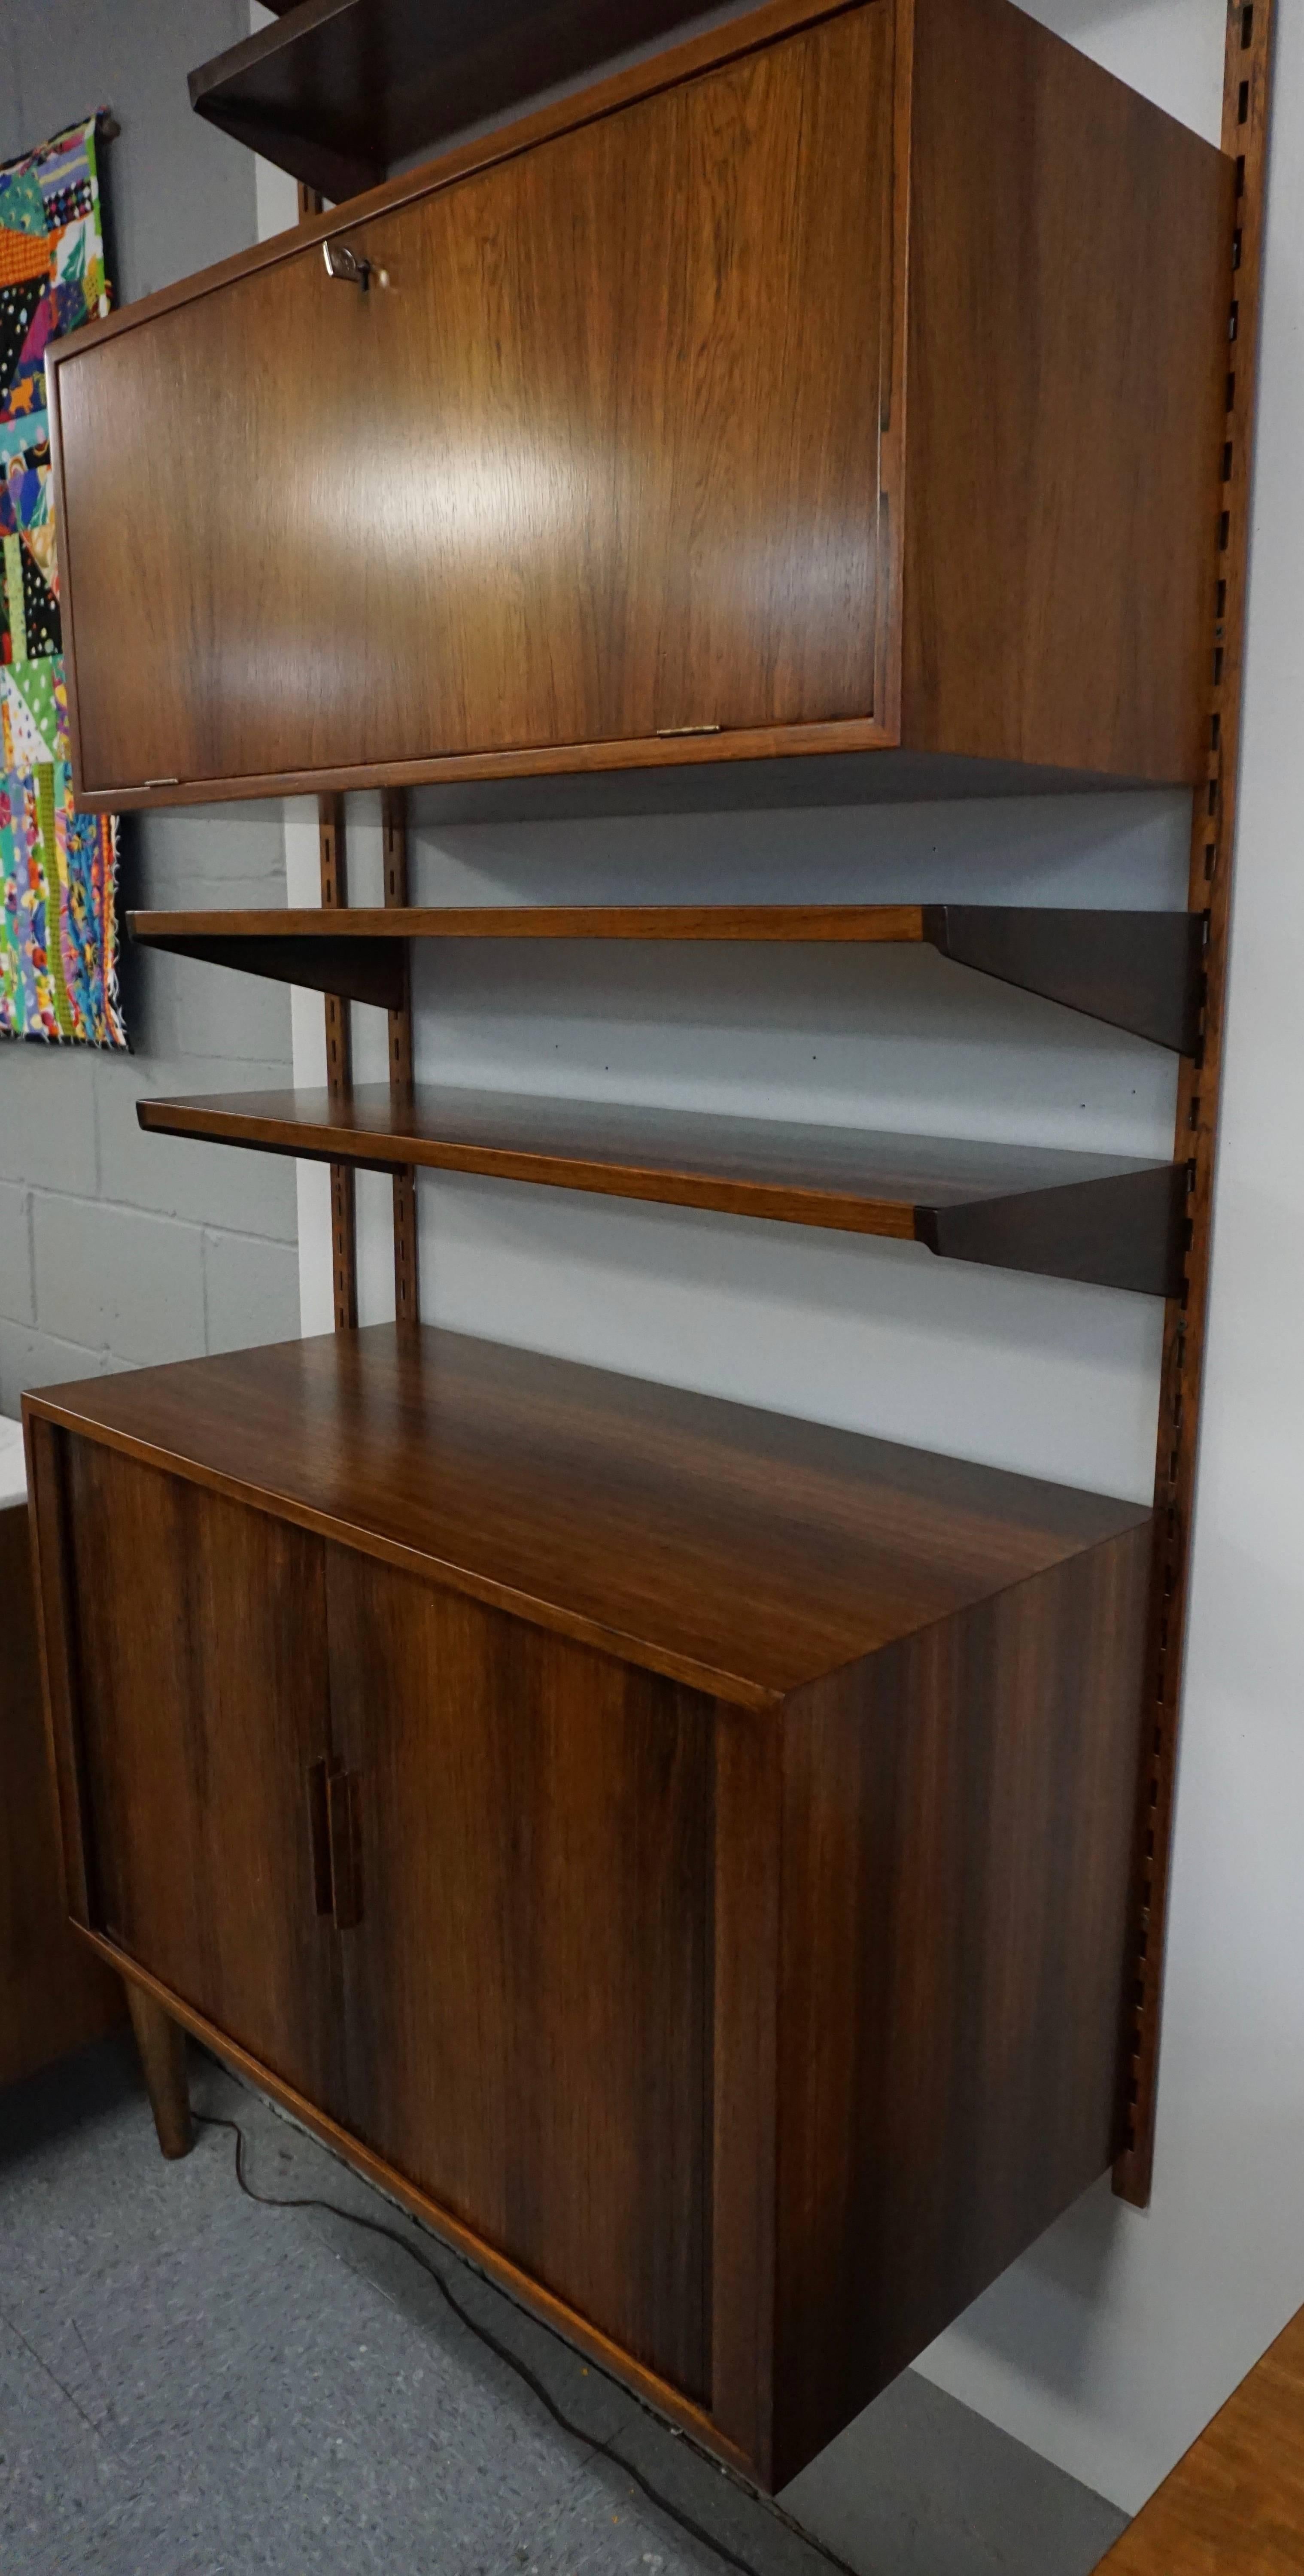 This rosewood wall mount system has four, shelves that measure: 7 D x 34 W, two shelves: 11 D x 34 W, one-bar cabinet 12.5 D x 34 W x 14 H and a tambour door cabinet, 15.75 D x 34 W x 19.5 H. The system has been lightly restored and is in very nice